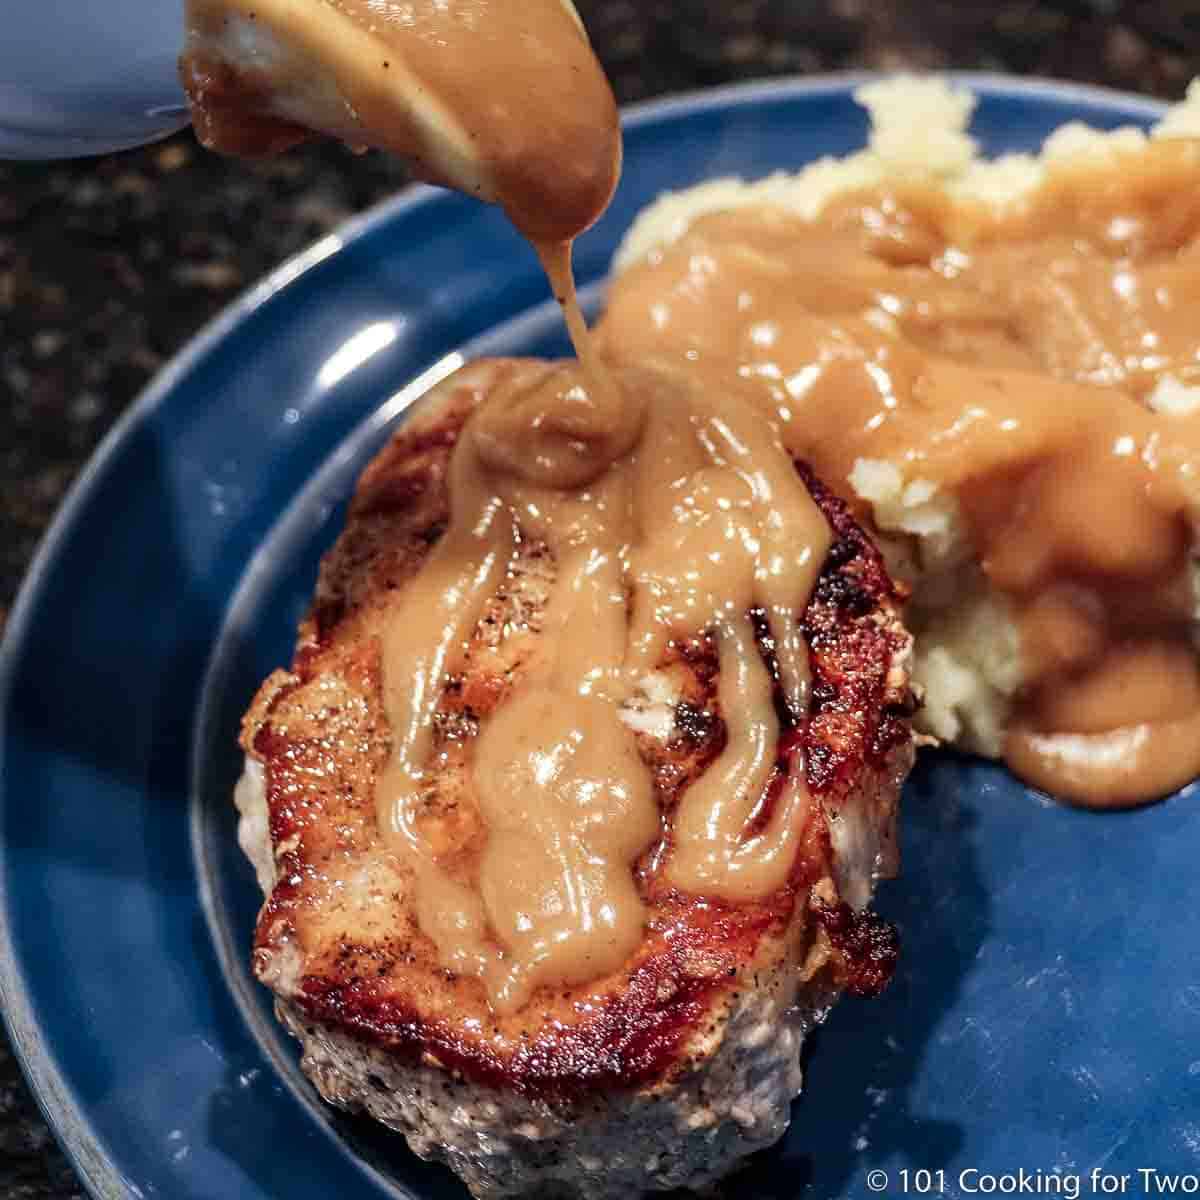 thick pork chop with gravy on a blue plate